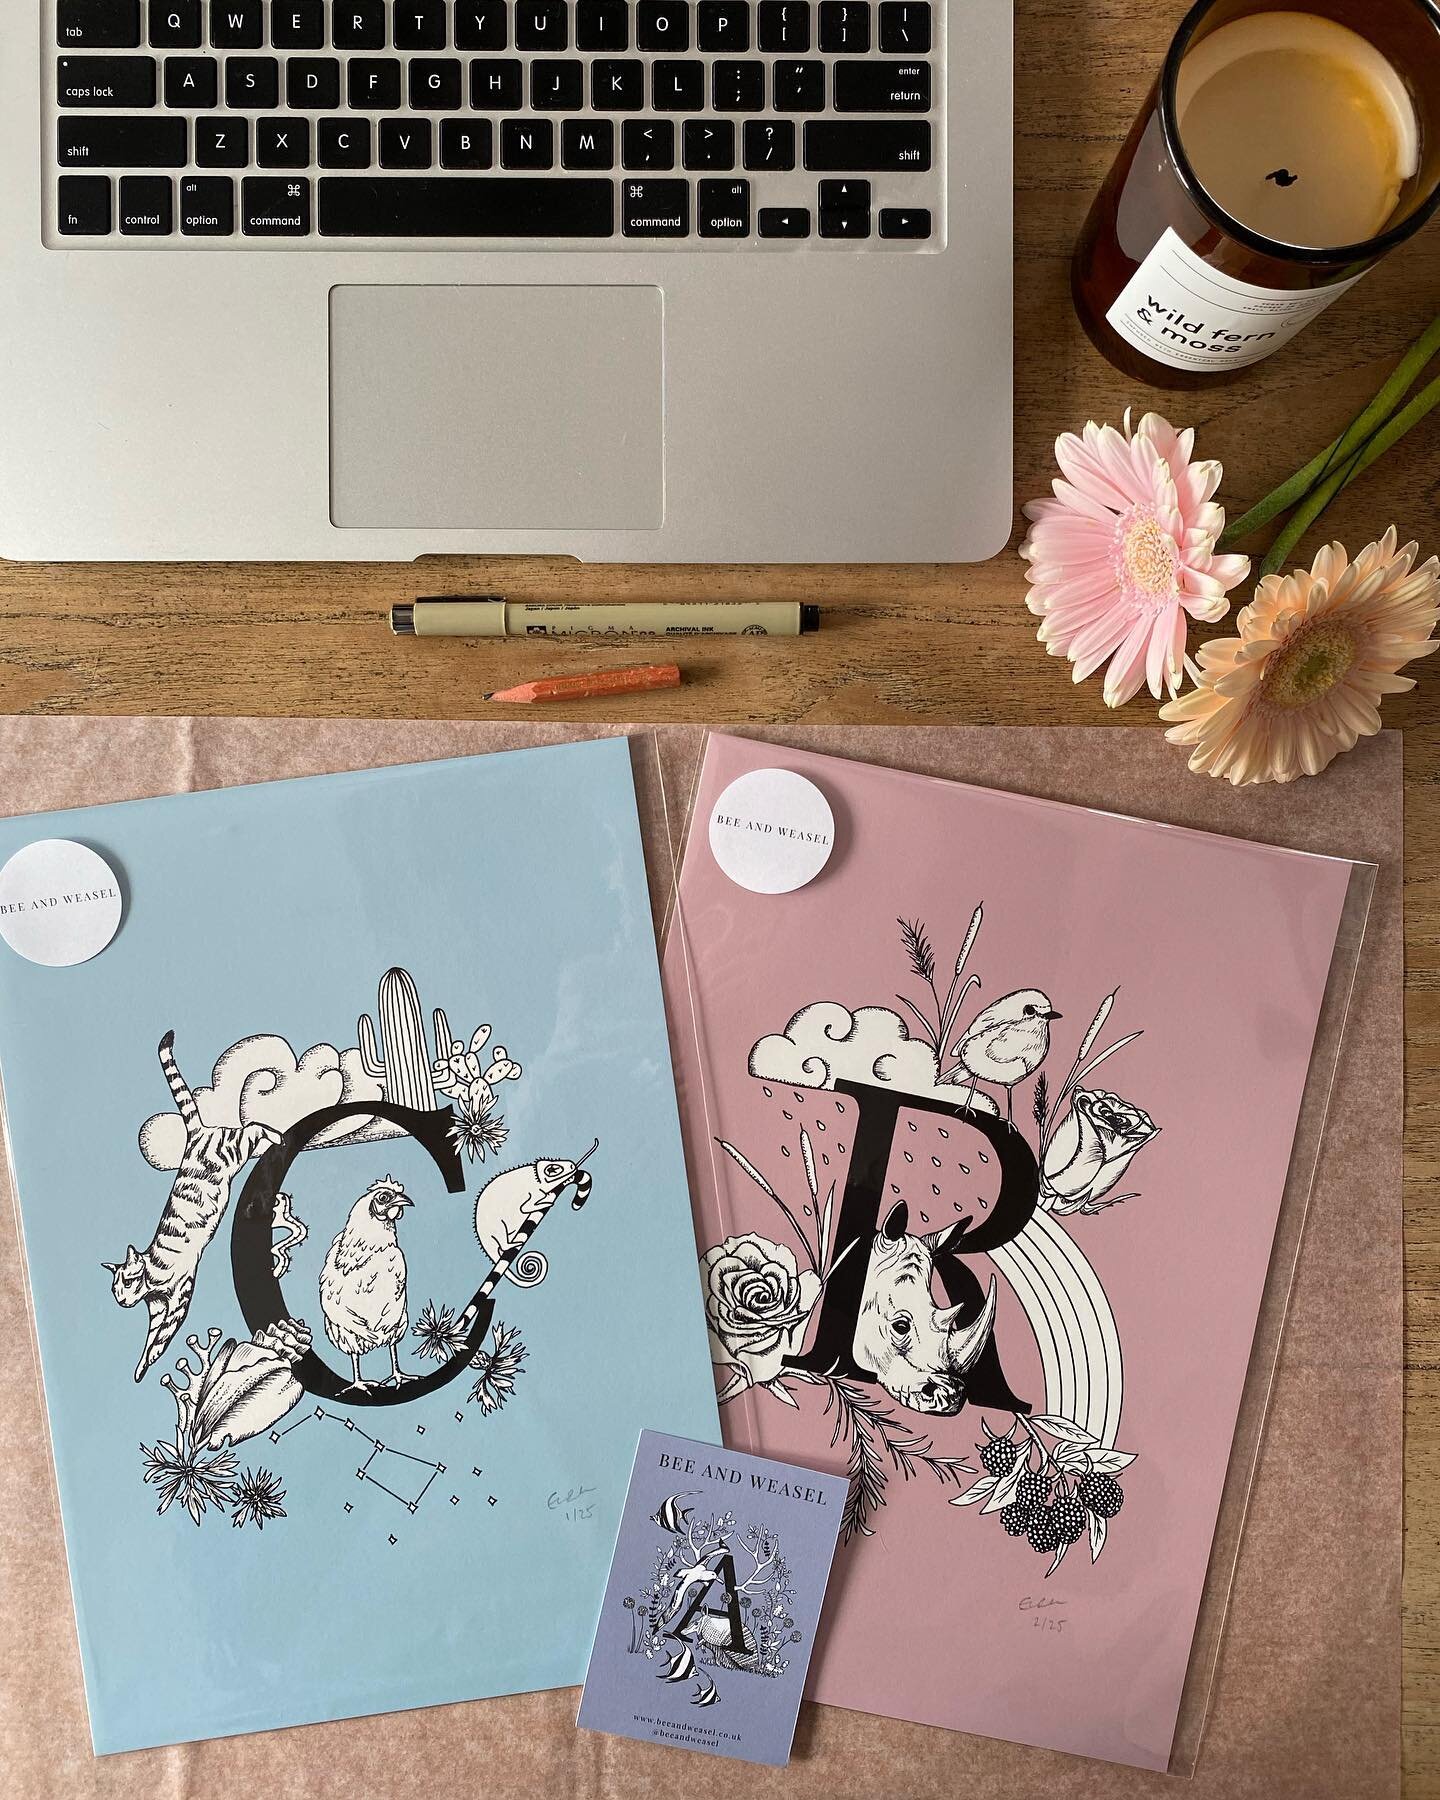 Alphabet prints available to order over on my website 💫 
Here we have C in &lsquo;arctic blue&rsquo; and R in &lsquo;rose pink&rsquo;.
How many things can you spot beginning with C and R? 🐓🦏 
👇🏻
www.beeandweasel.co.uk
&bull;
&bull;
&bull;
#alpha